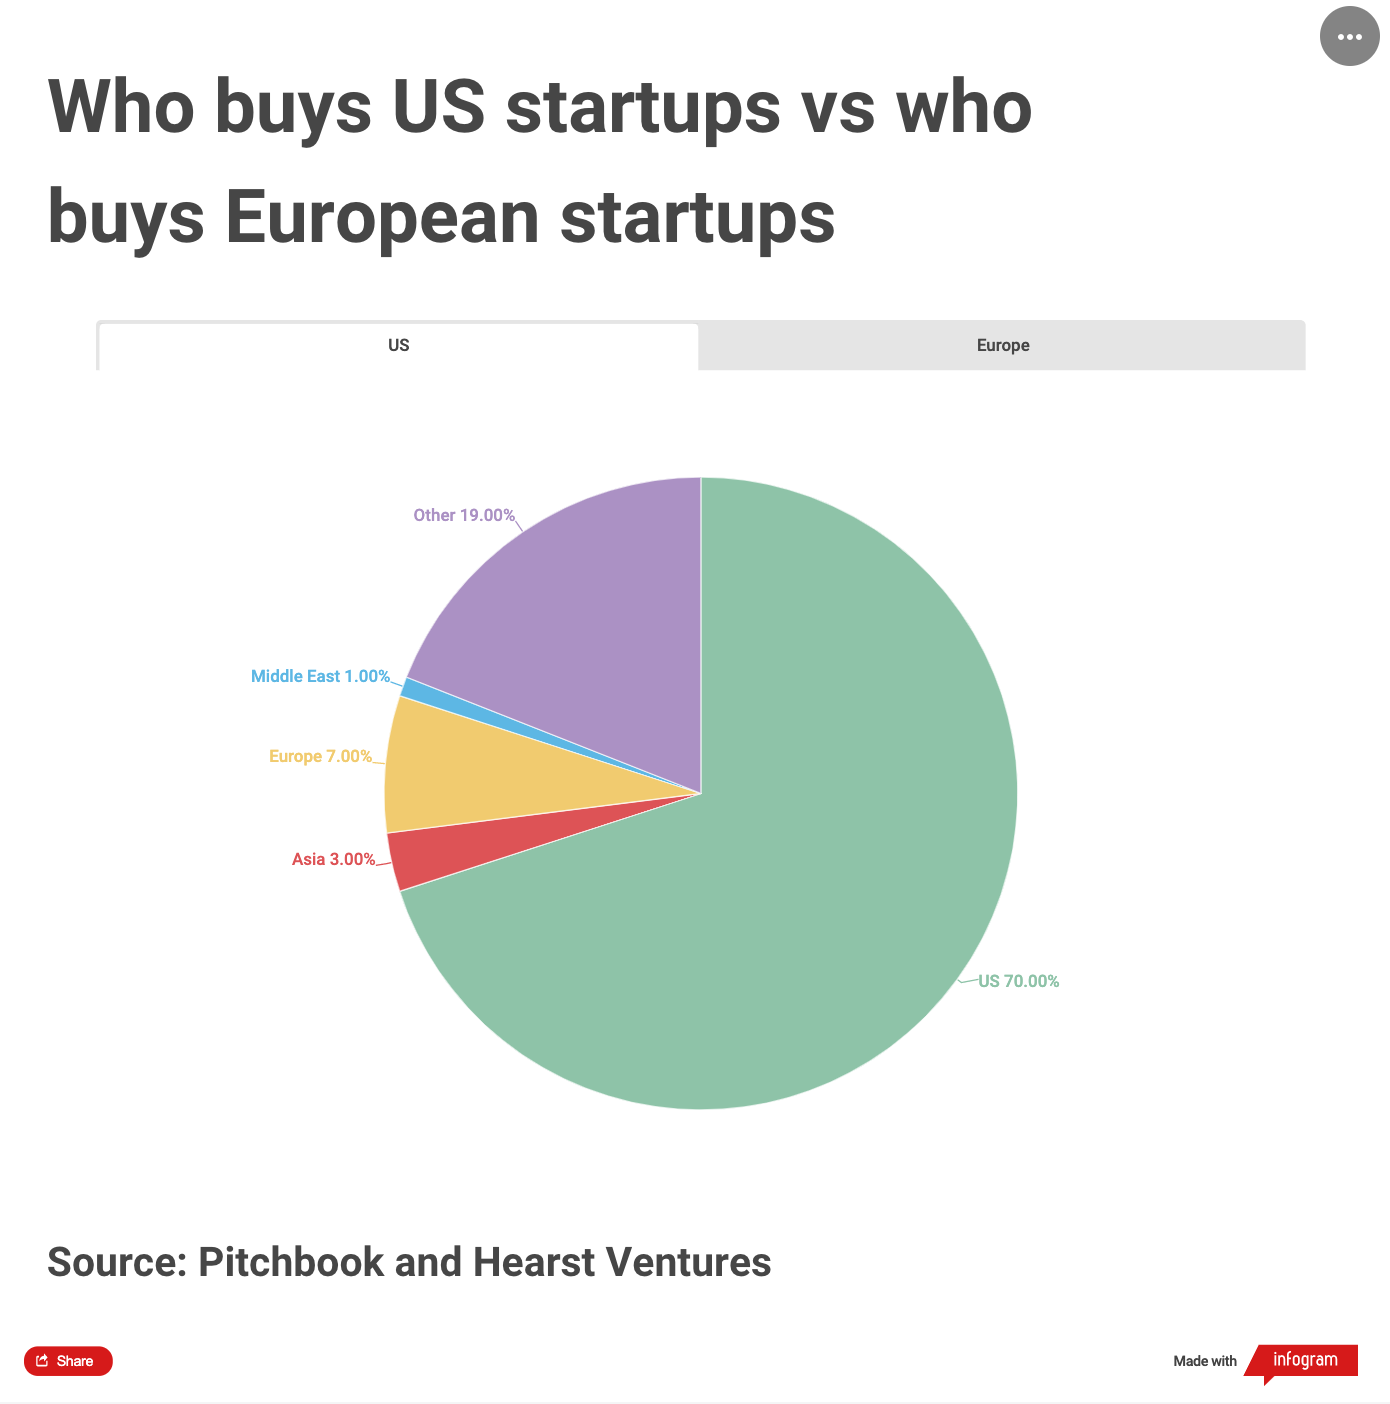 Pie chart showing the nationality of buyer in US startup deals